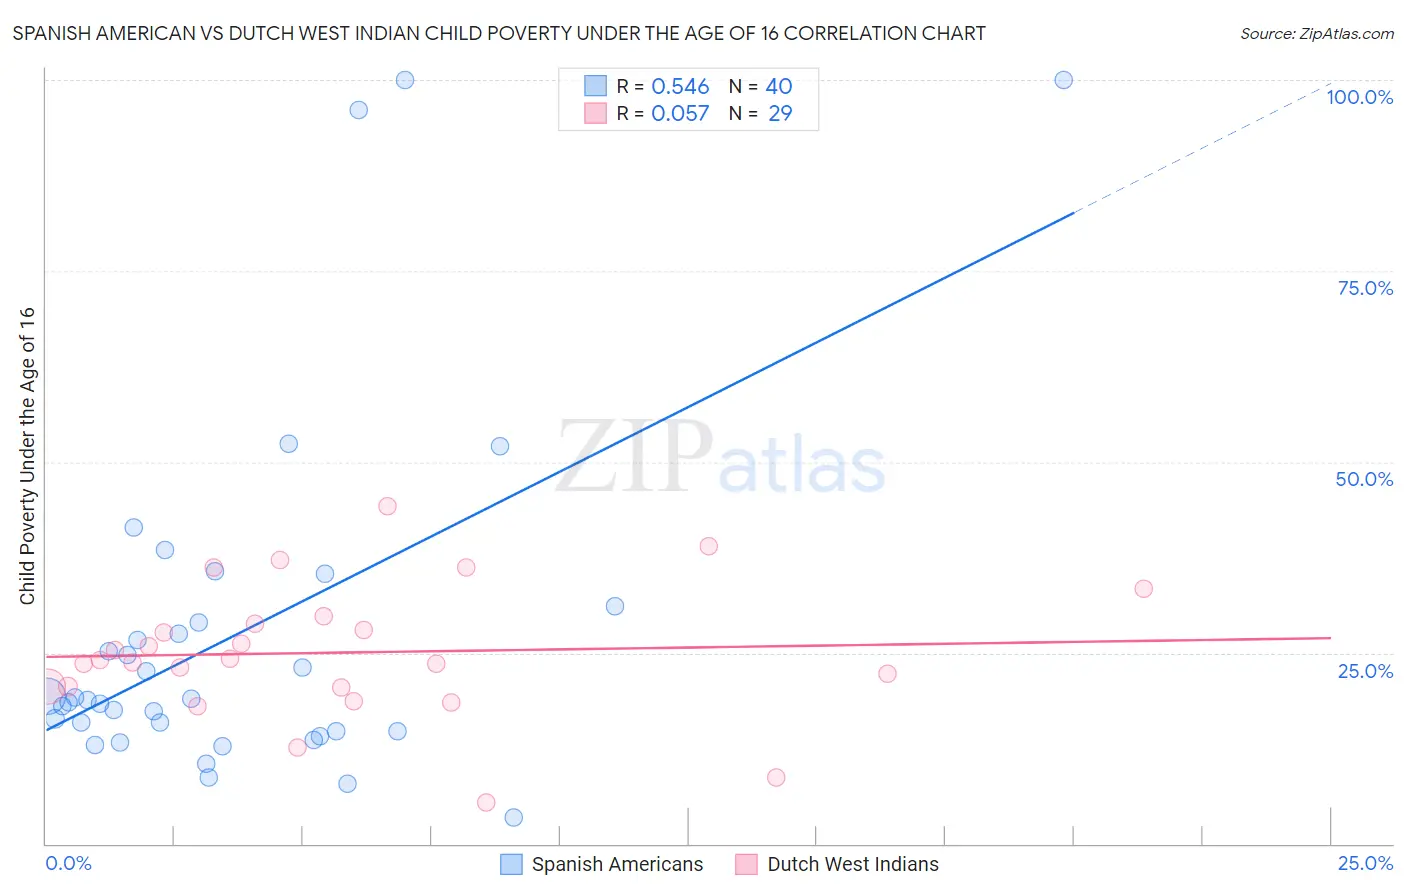 Spanish American vs Dutch West Indian Child Poverty Under the Age of 16